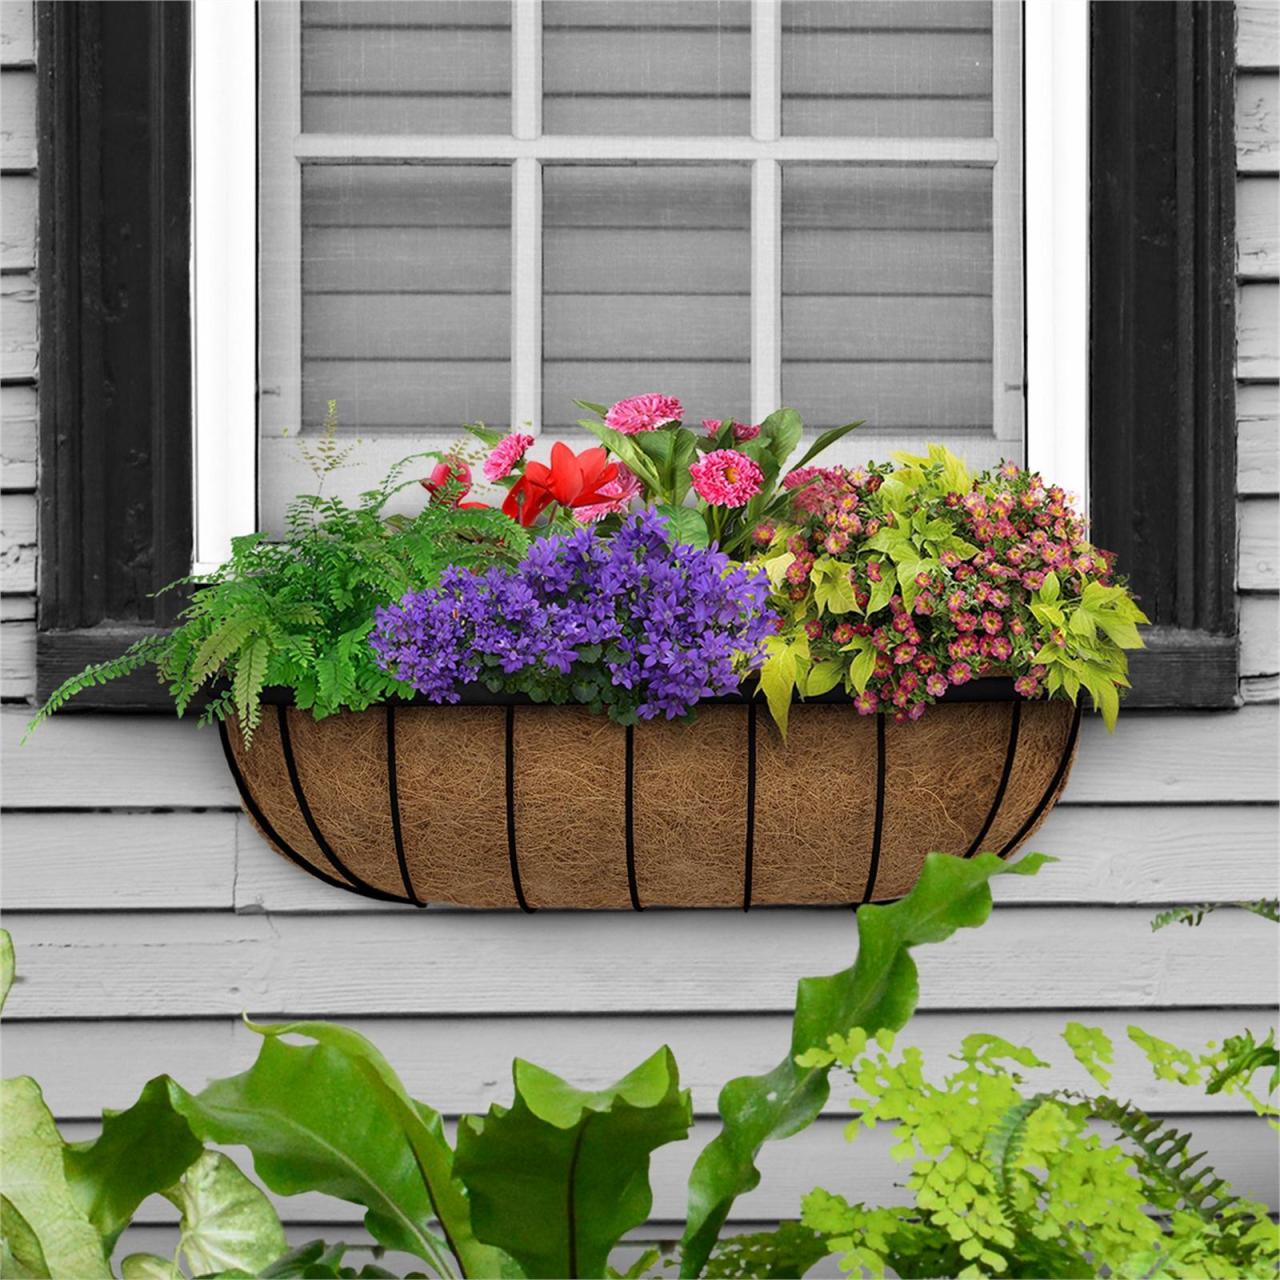 Hanging Plants Indoor | Bunnings Hanging Basket Plants: A Comprehensive Guide to Beauty and Blooms